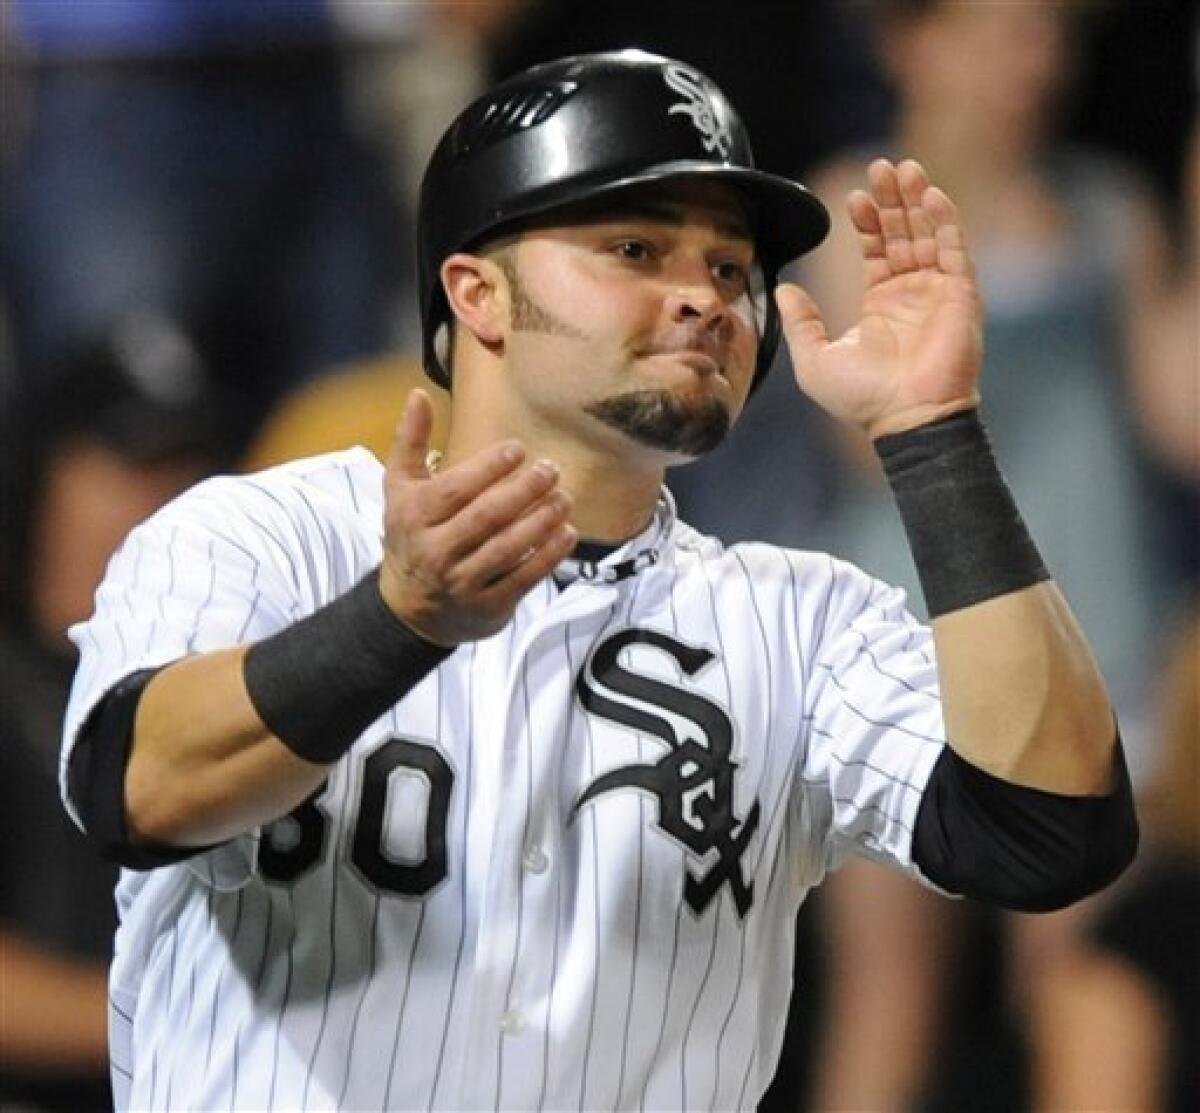 Could Nick Swisher Return to the Yankees?